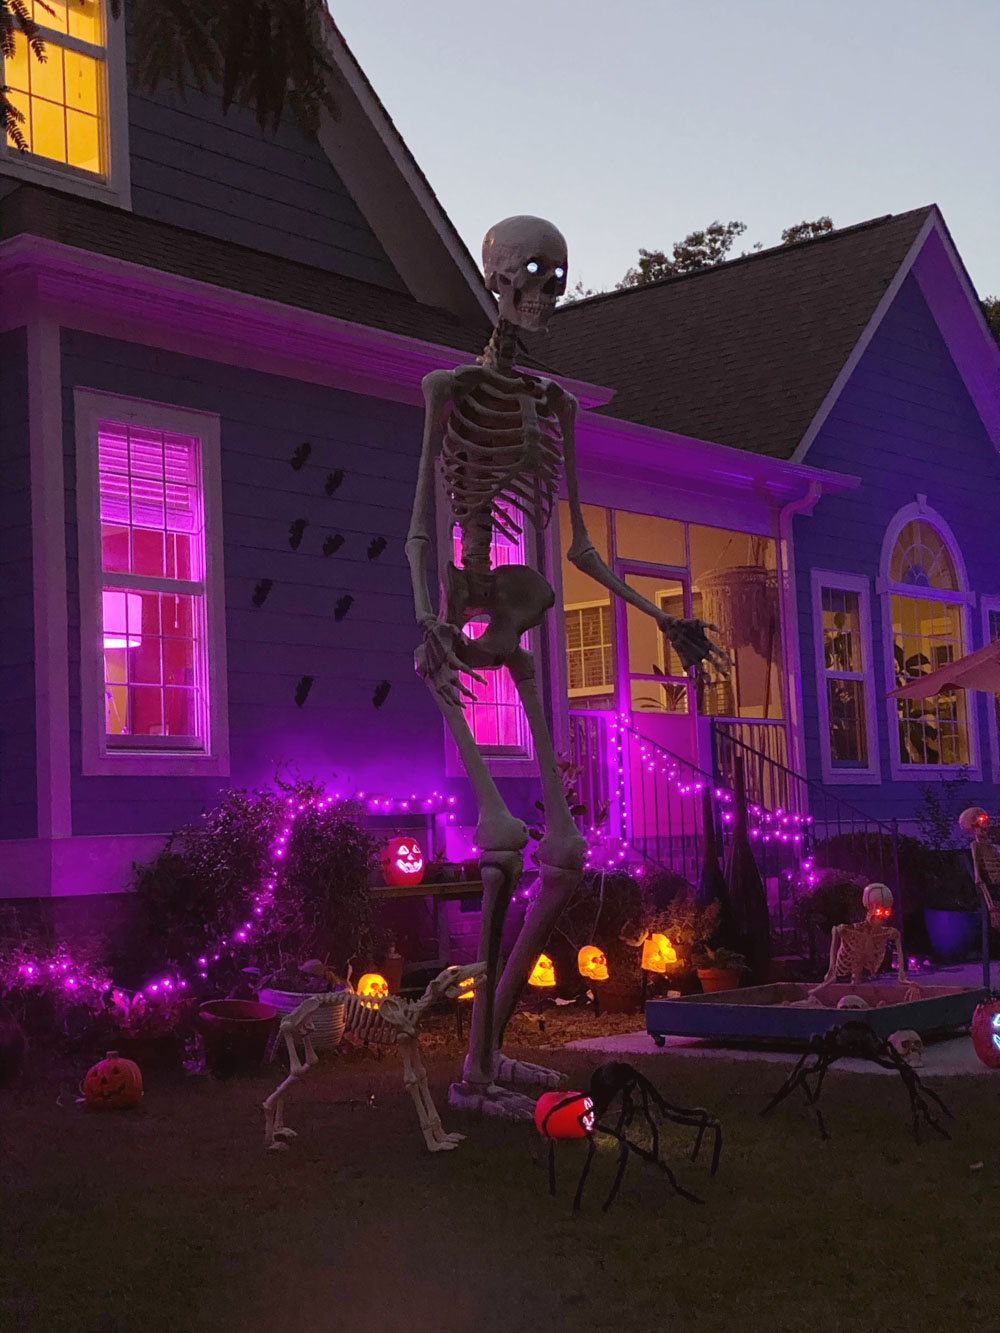 A home decorated with glowing purple lights for Halloween.